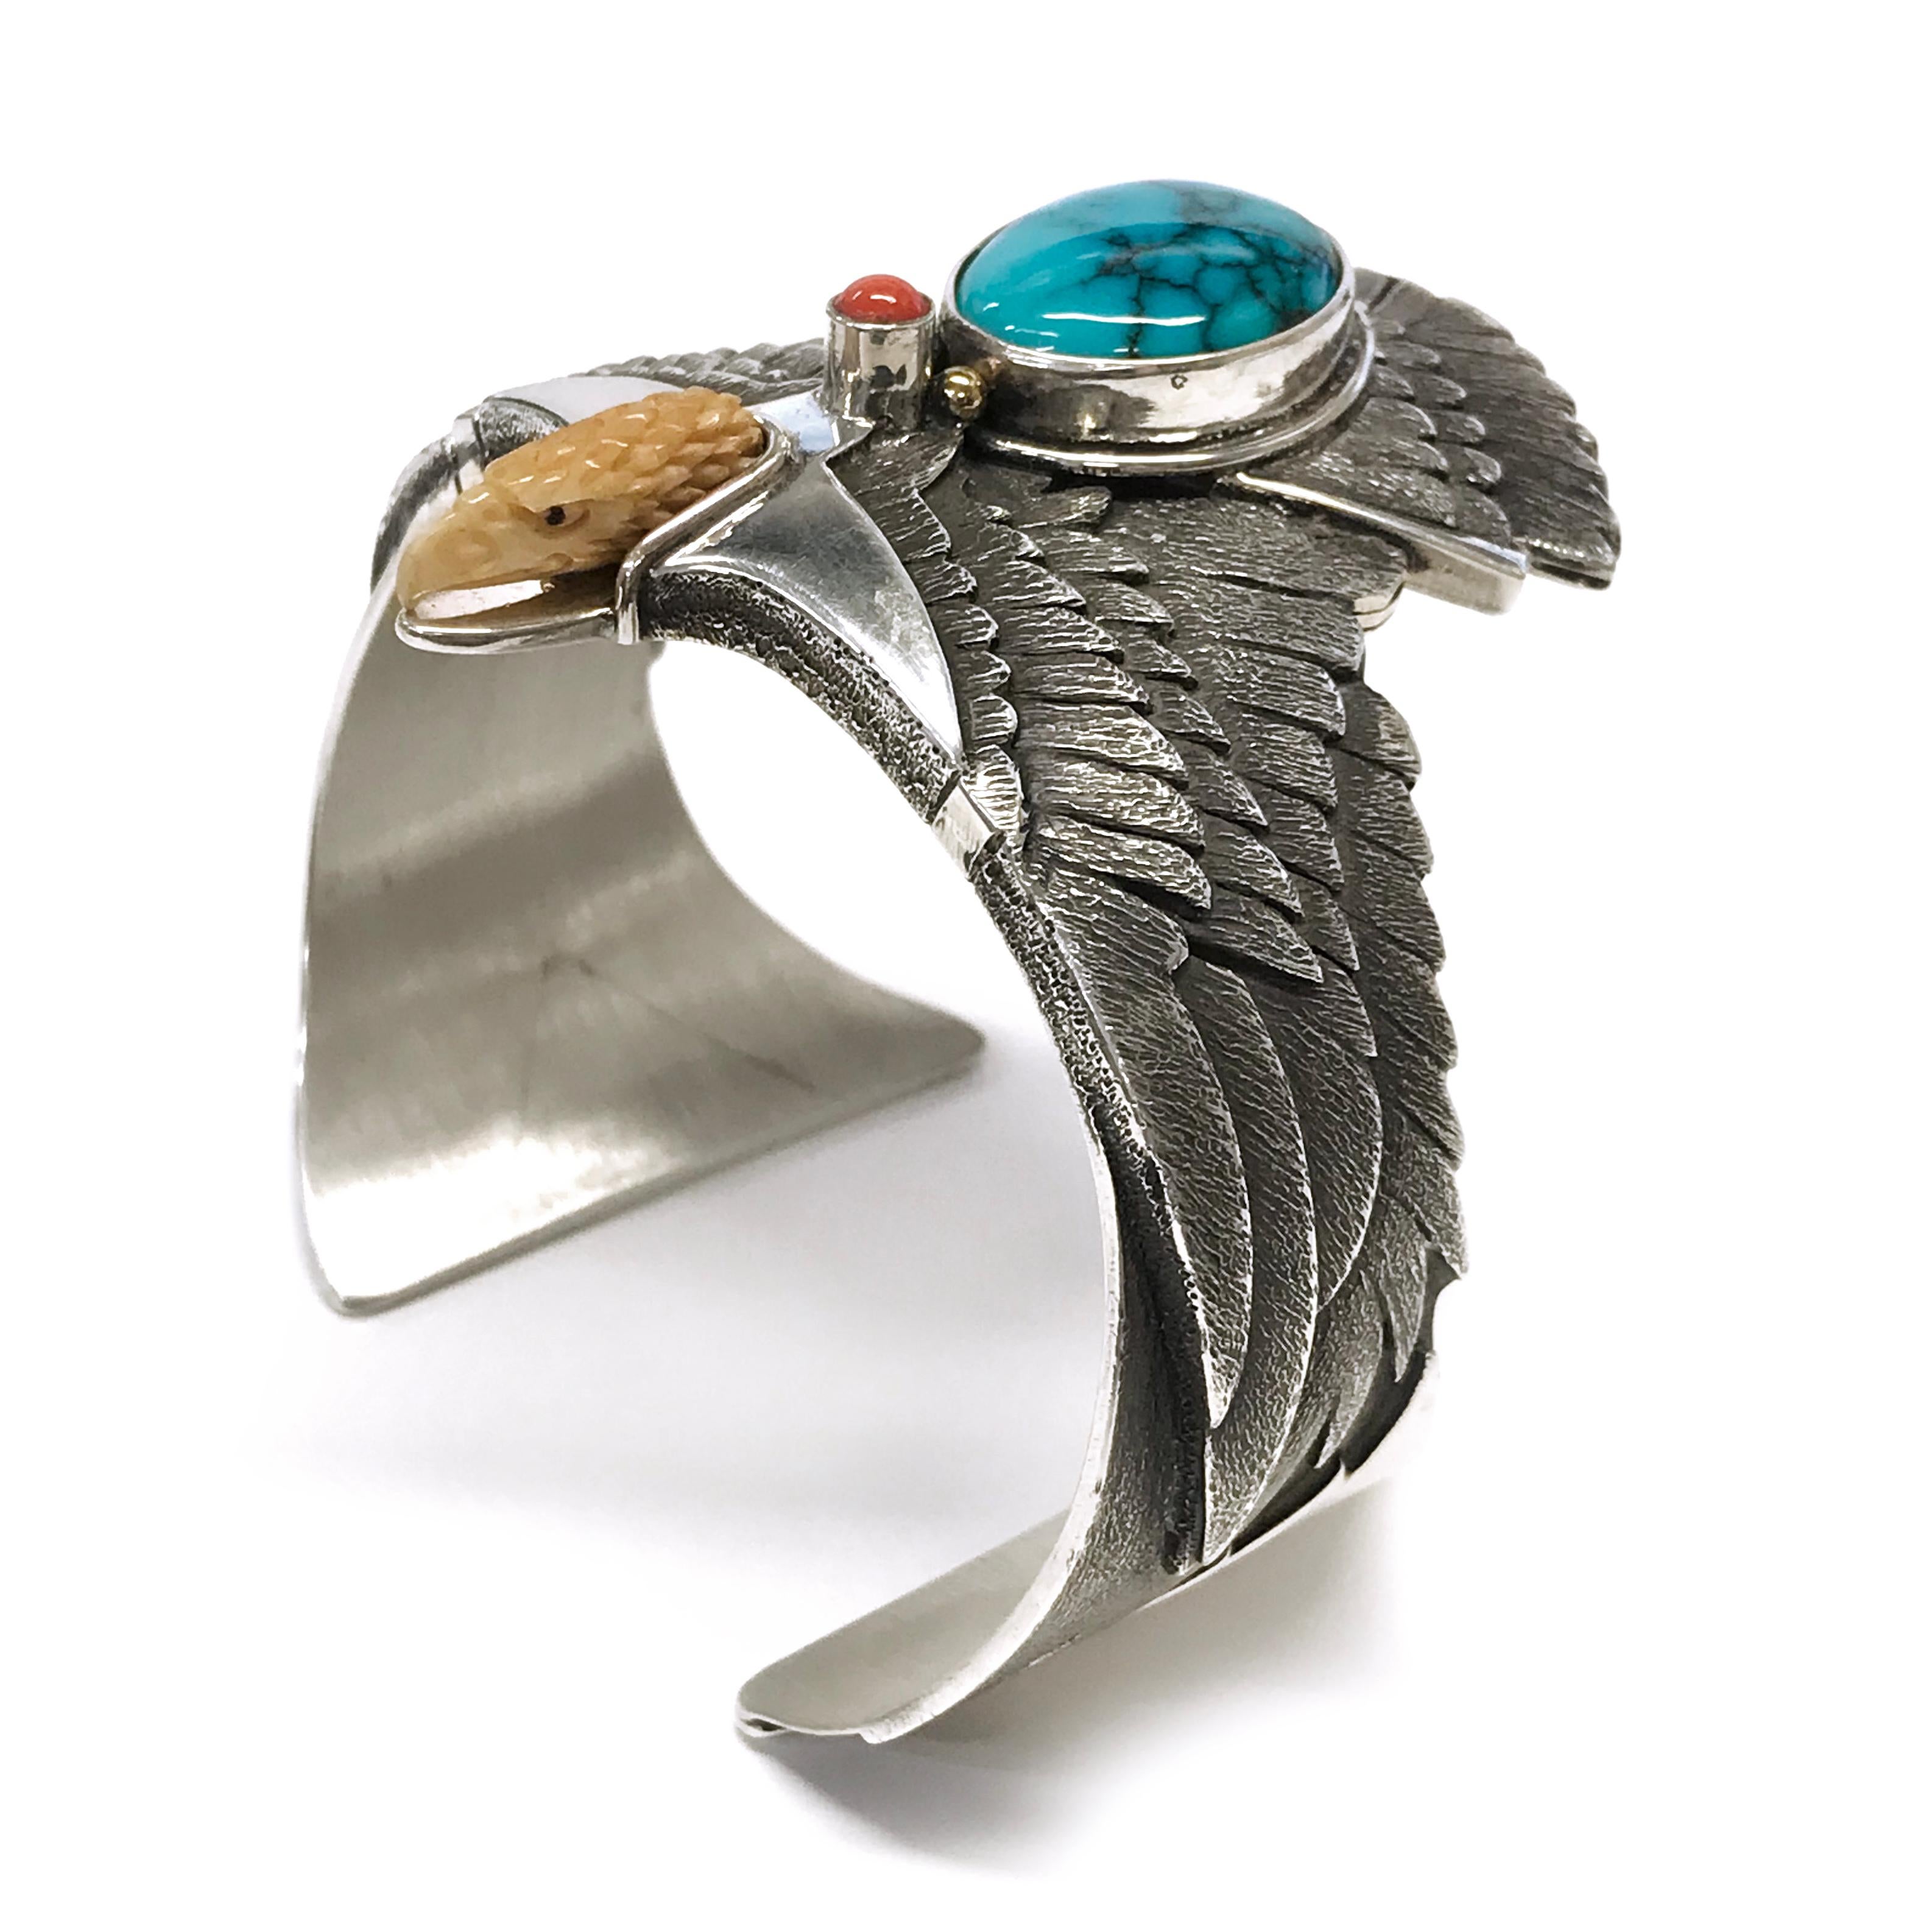 Handcrafted from a sheet of Sterling Silver with 14k accents by jewelry maker, Ray Winner. This phenomenal cuff bracelet features a natural Kingman Turquoise pear-shaped cabochon and bezel-set Mediterranean Coral round cabochon. The form of the cuff